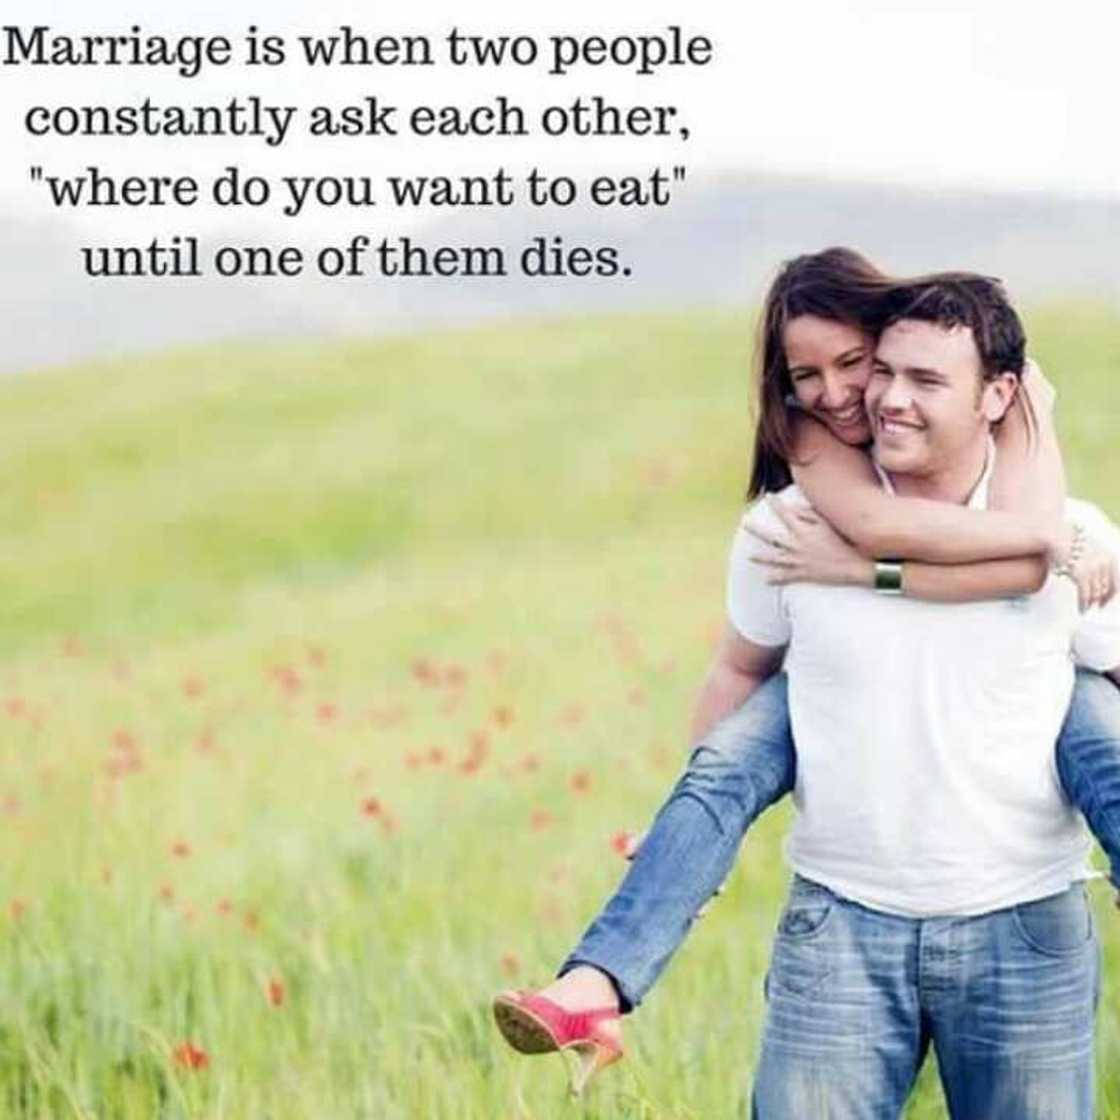 Funny marriage memes